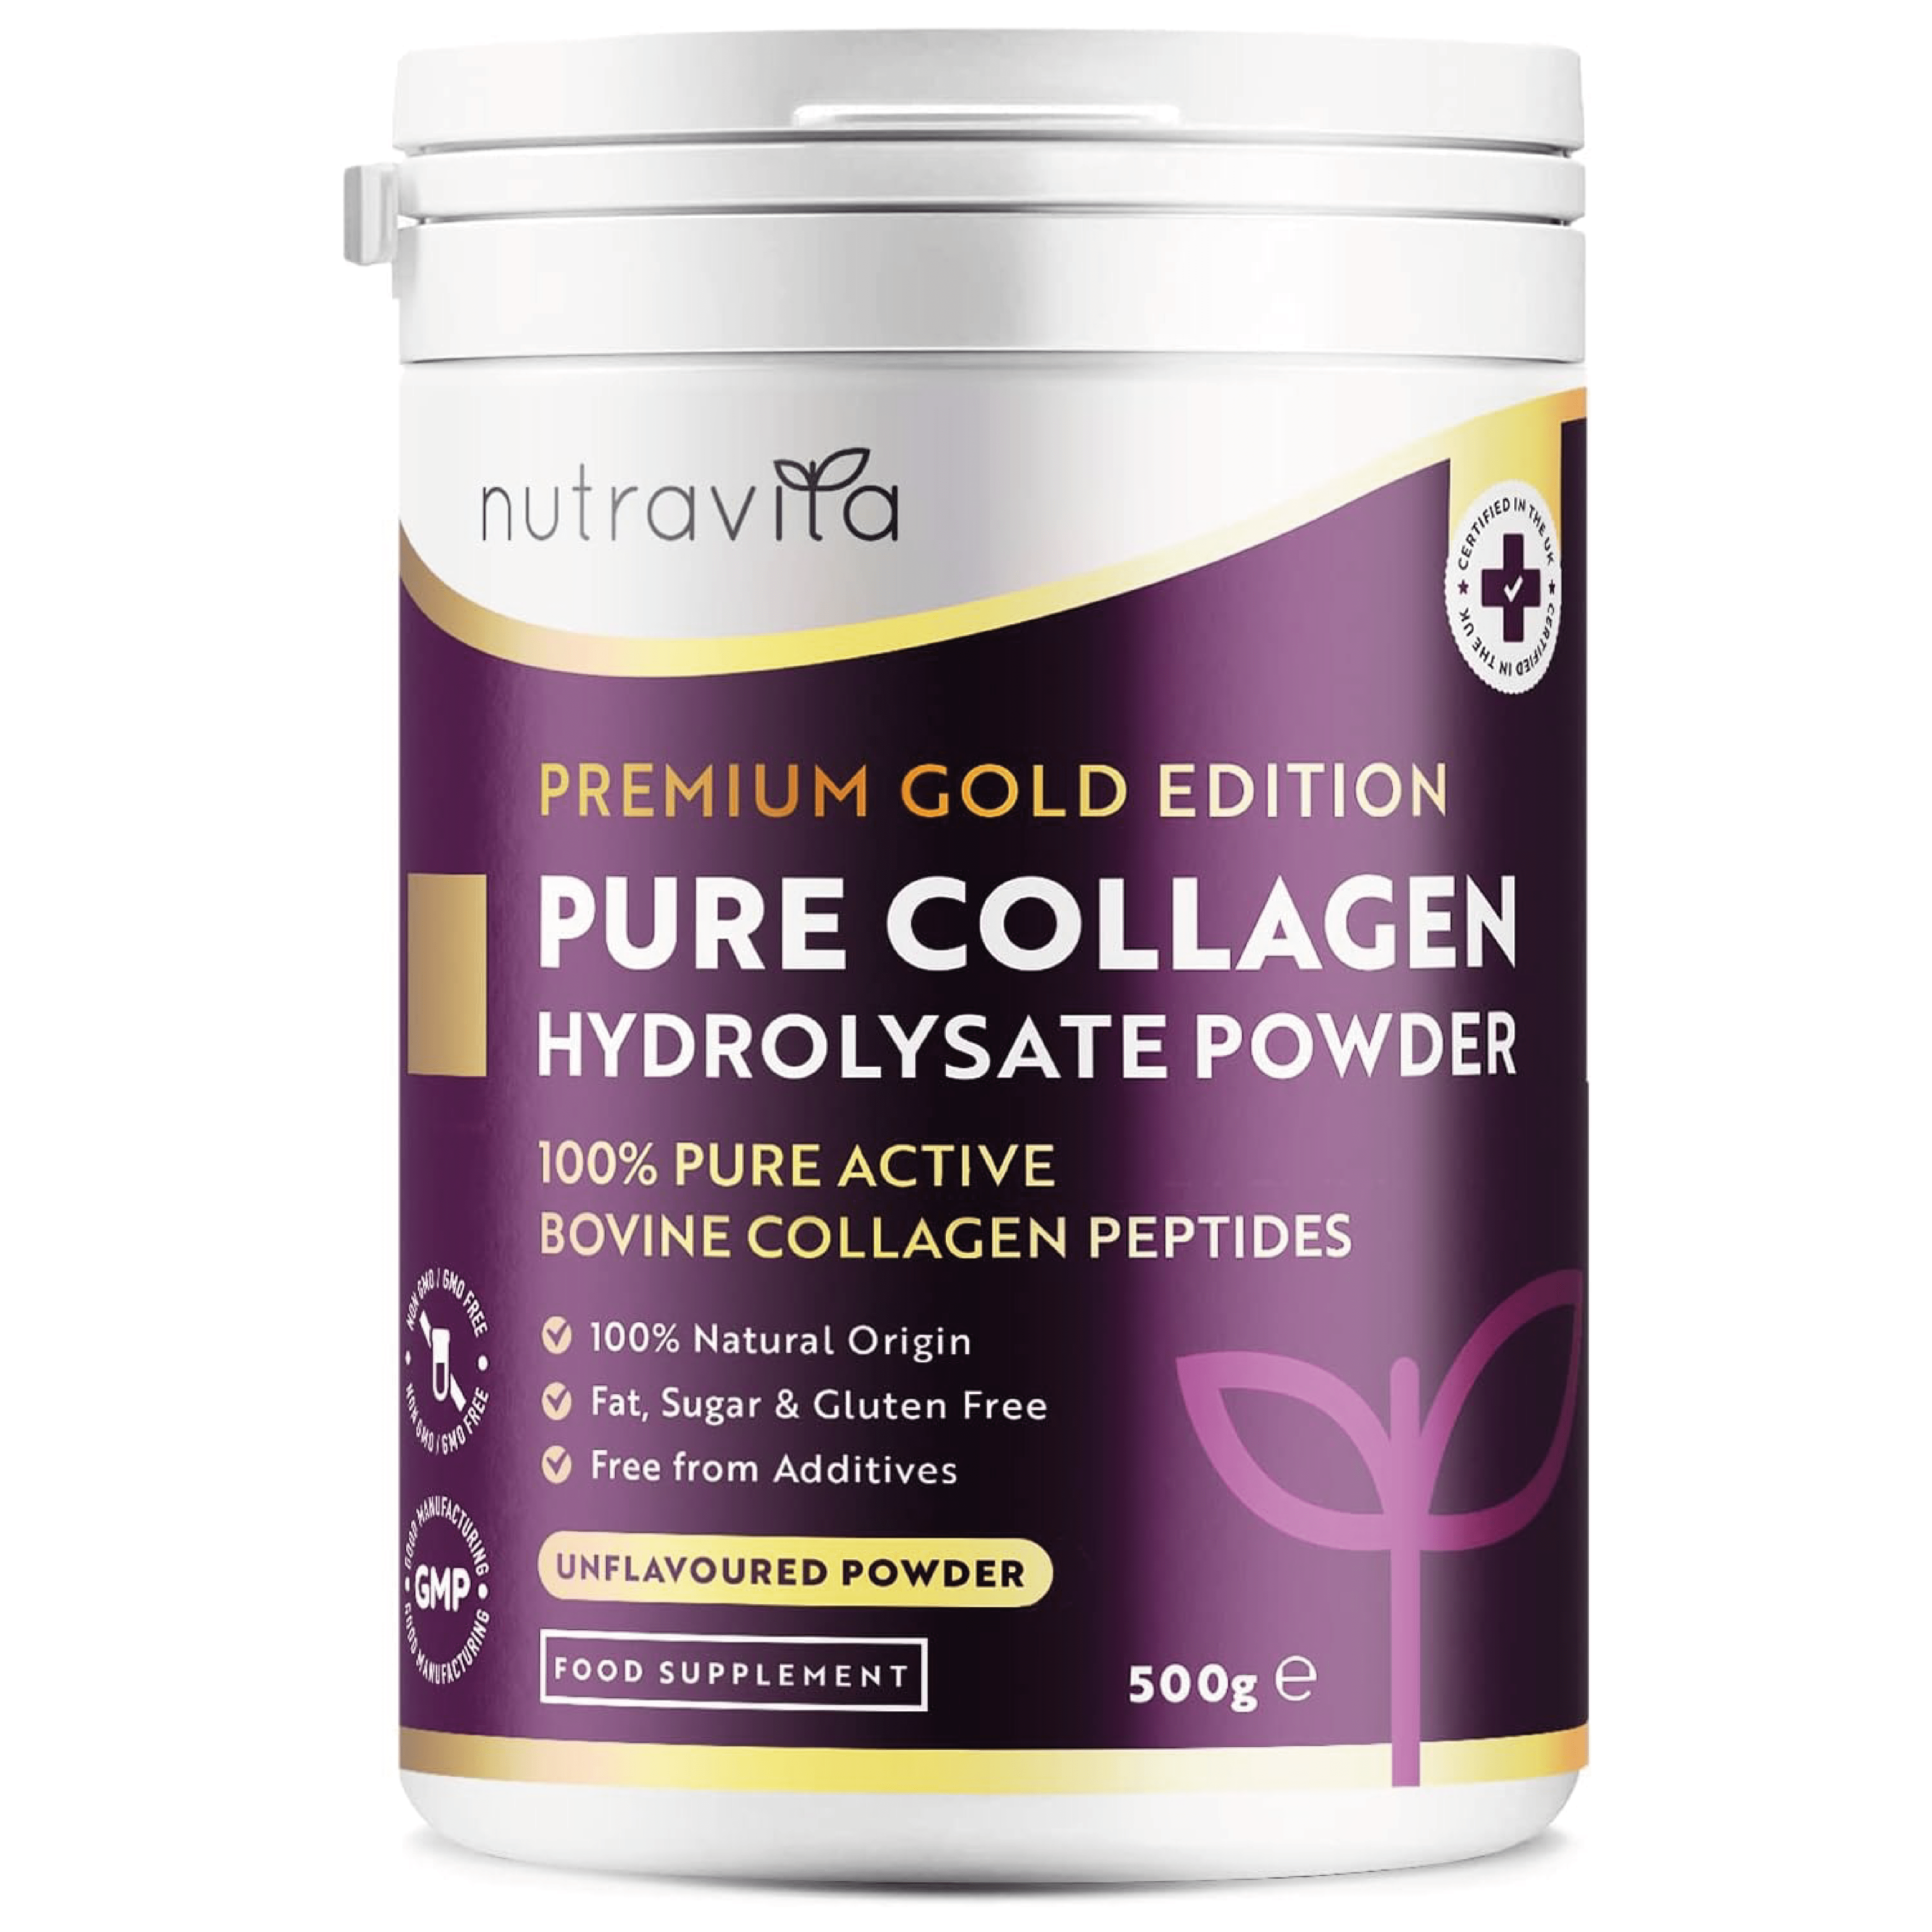 Revitalize your skin, hair, and joints with Nutravita's Collagen Powder. This 500g premium gold standard bovine collagen supplement offers 50 servings, providing a rich source of collagen peptides with 8 essential amino acids. Meticulously crafted in the UK, this high-quality formula supports your overall well-being. Transform your daily routine with a boost of collagen, the building block for healthy skin, hair, and joints. Choose Nutravita for your wellness journey.